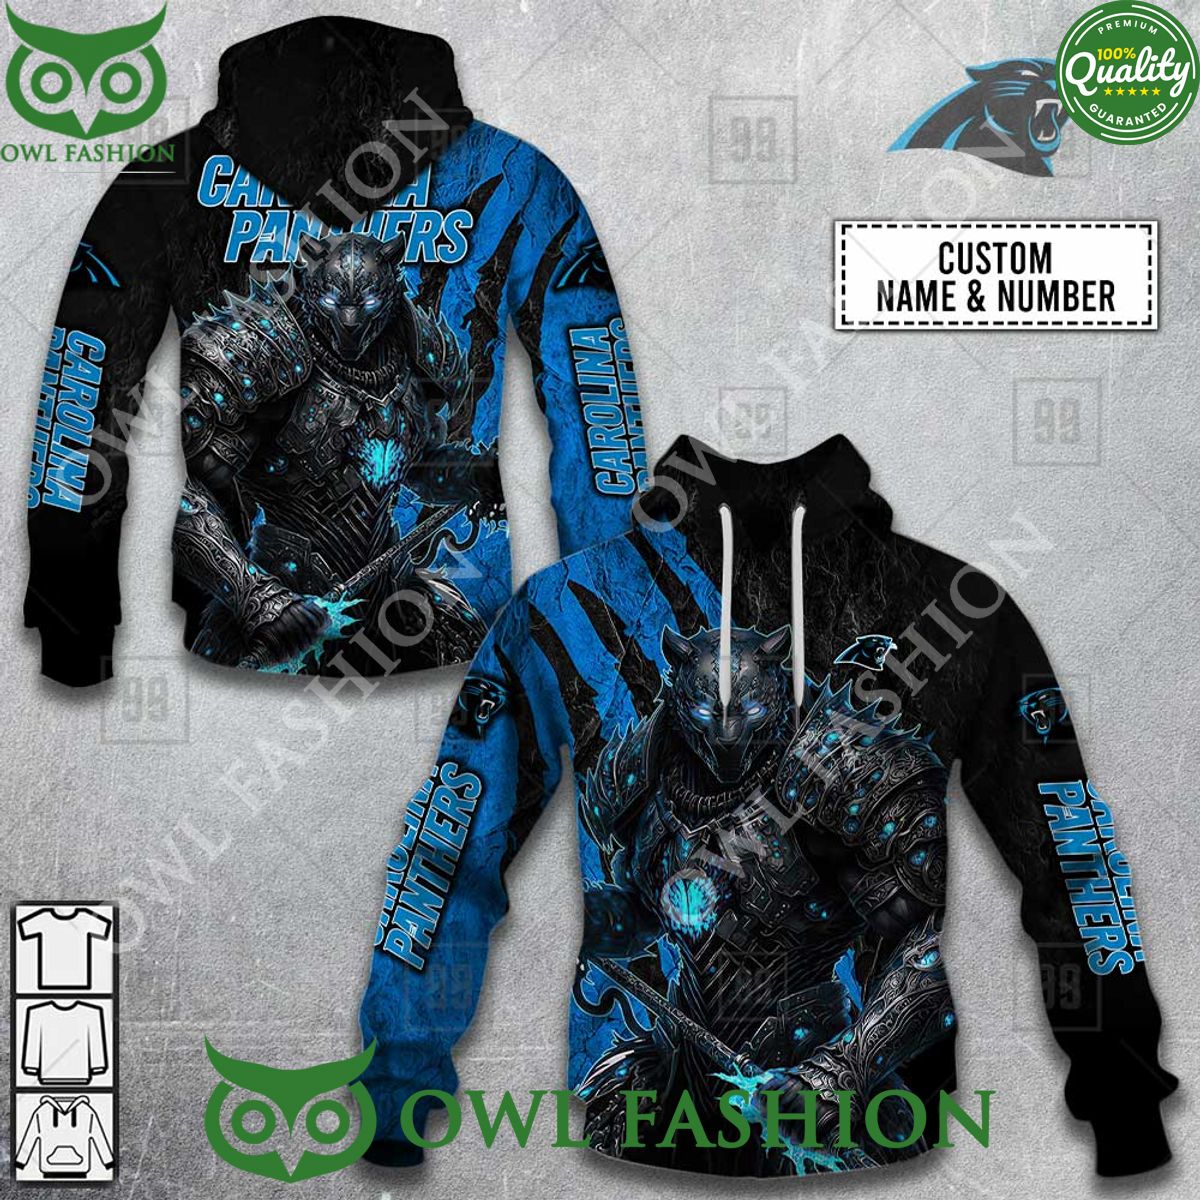 Warriors NFL Carolina Panthers Form Printed Hoodie shirt Handsome as usual